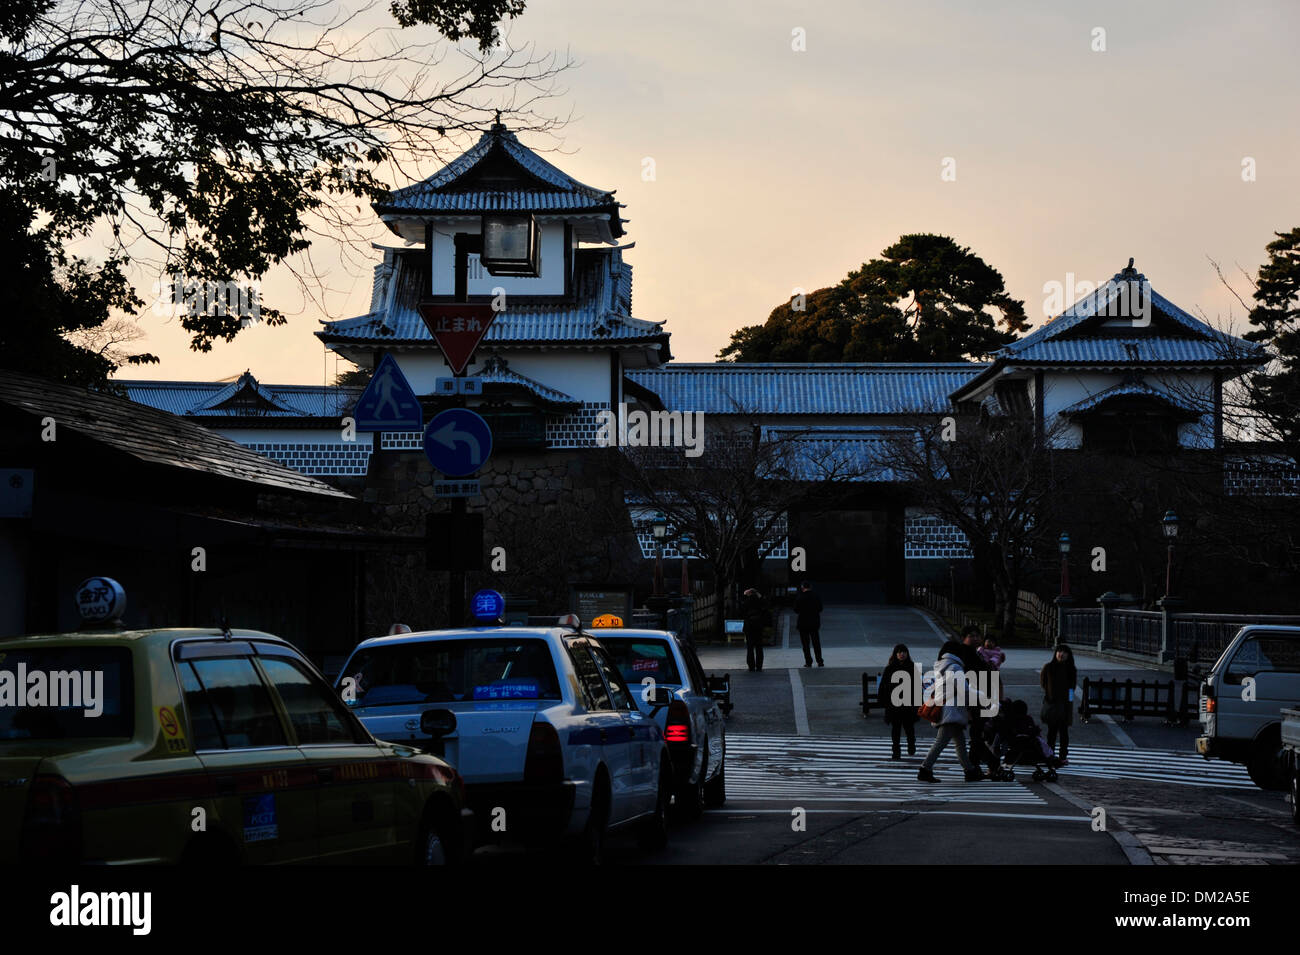 The Isikawa Gate of the Kanazawa Castle in the evening Stock Photo